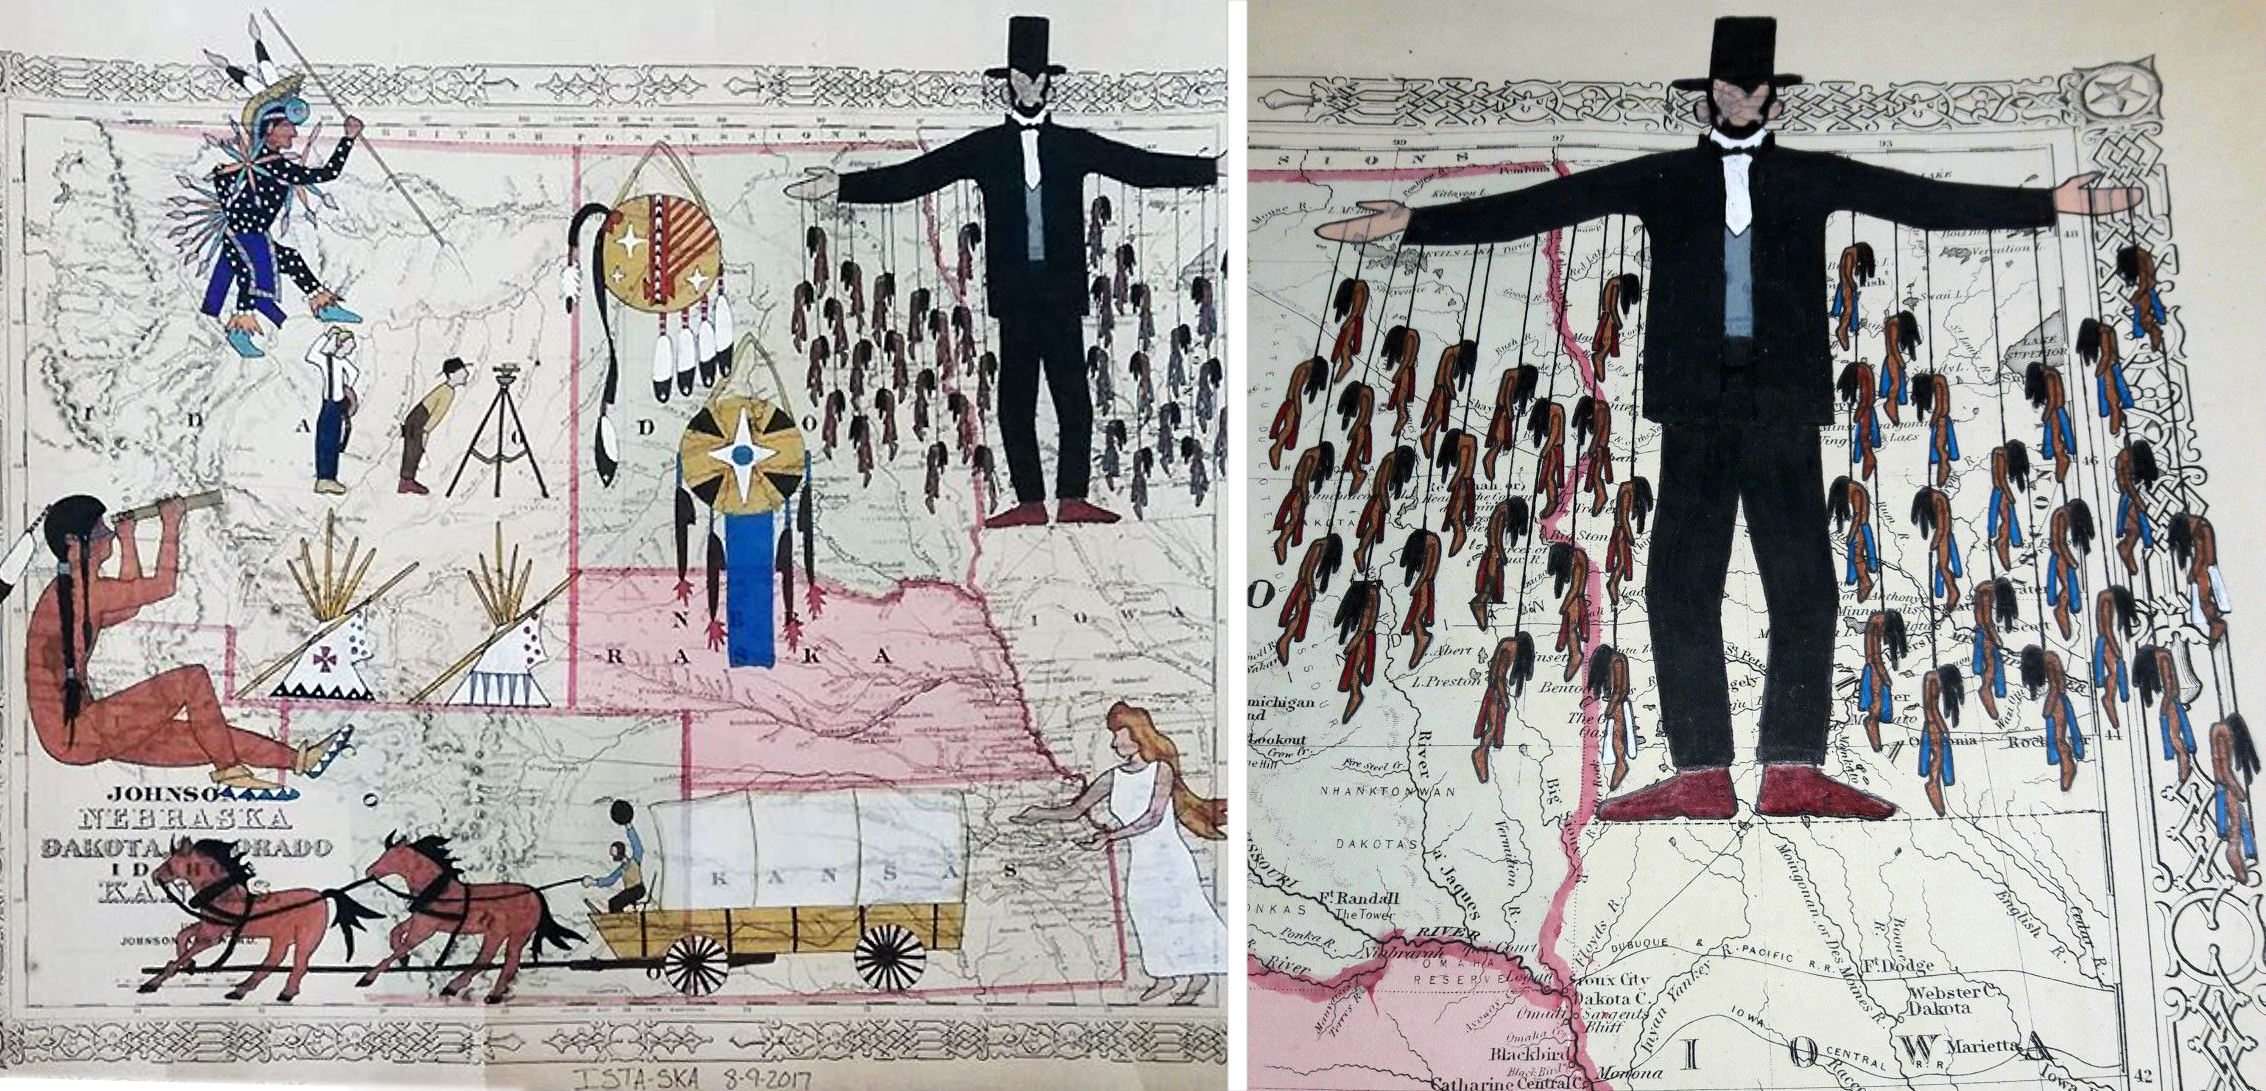 Travis Blackbird, Ledger art on map, (and detail at right), 2017, ink on antique ledger, © Travis Blackbird used by permission